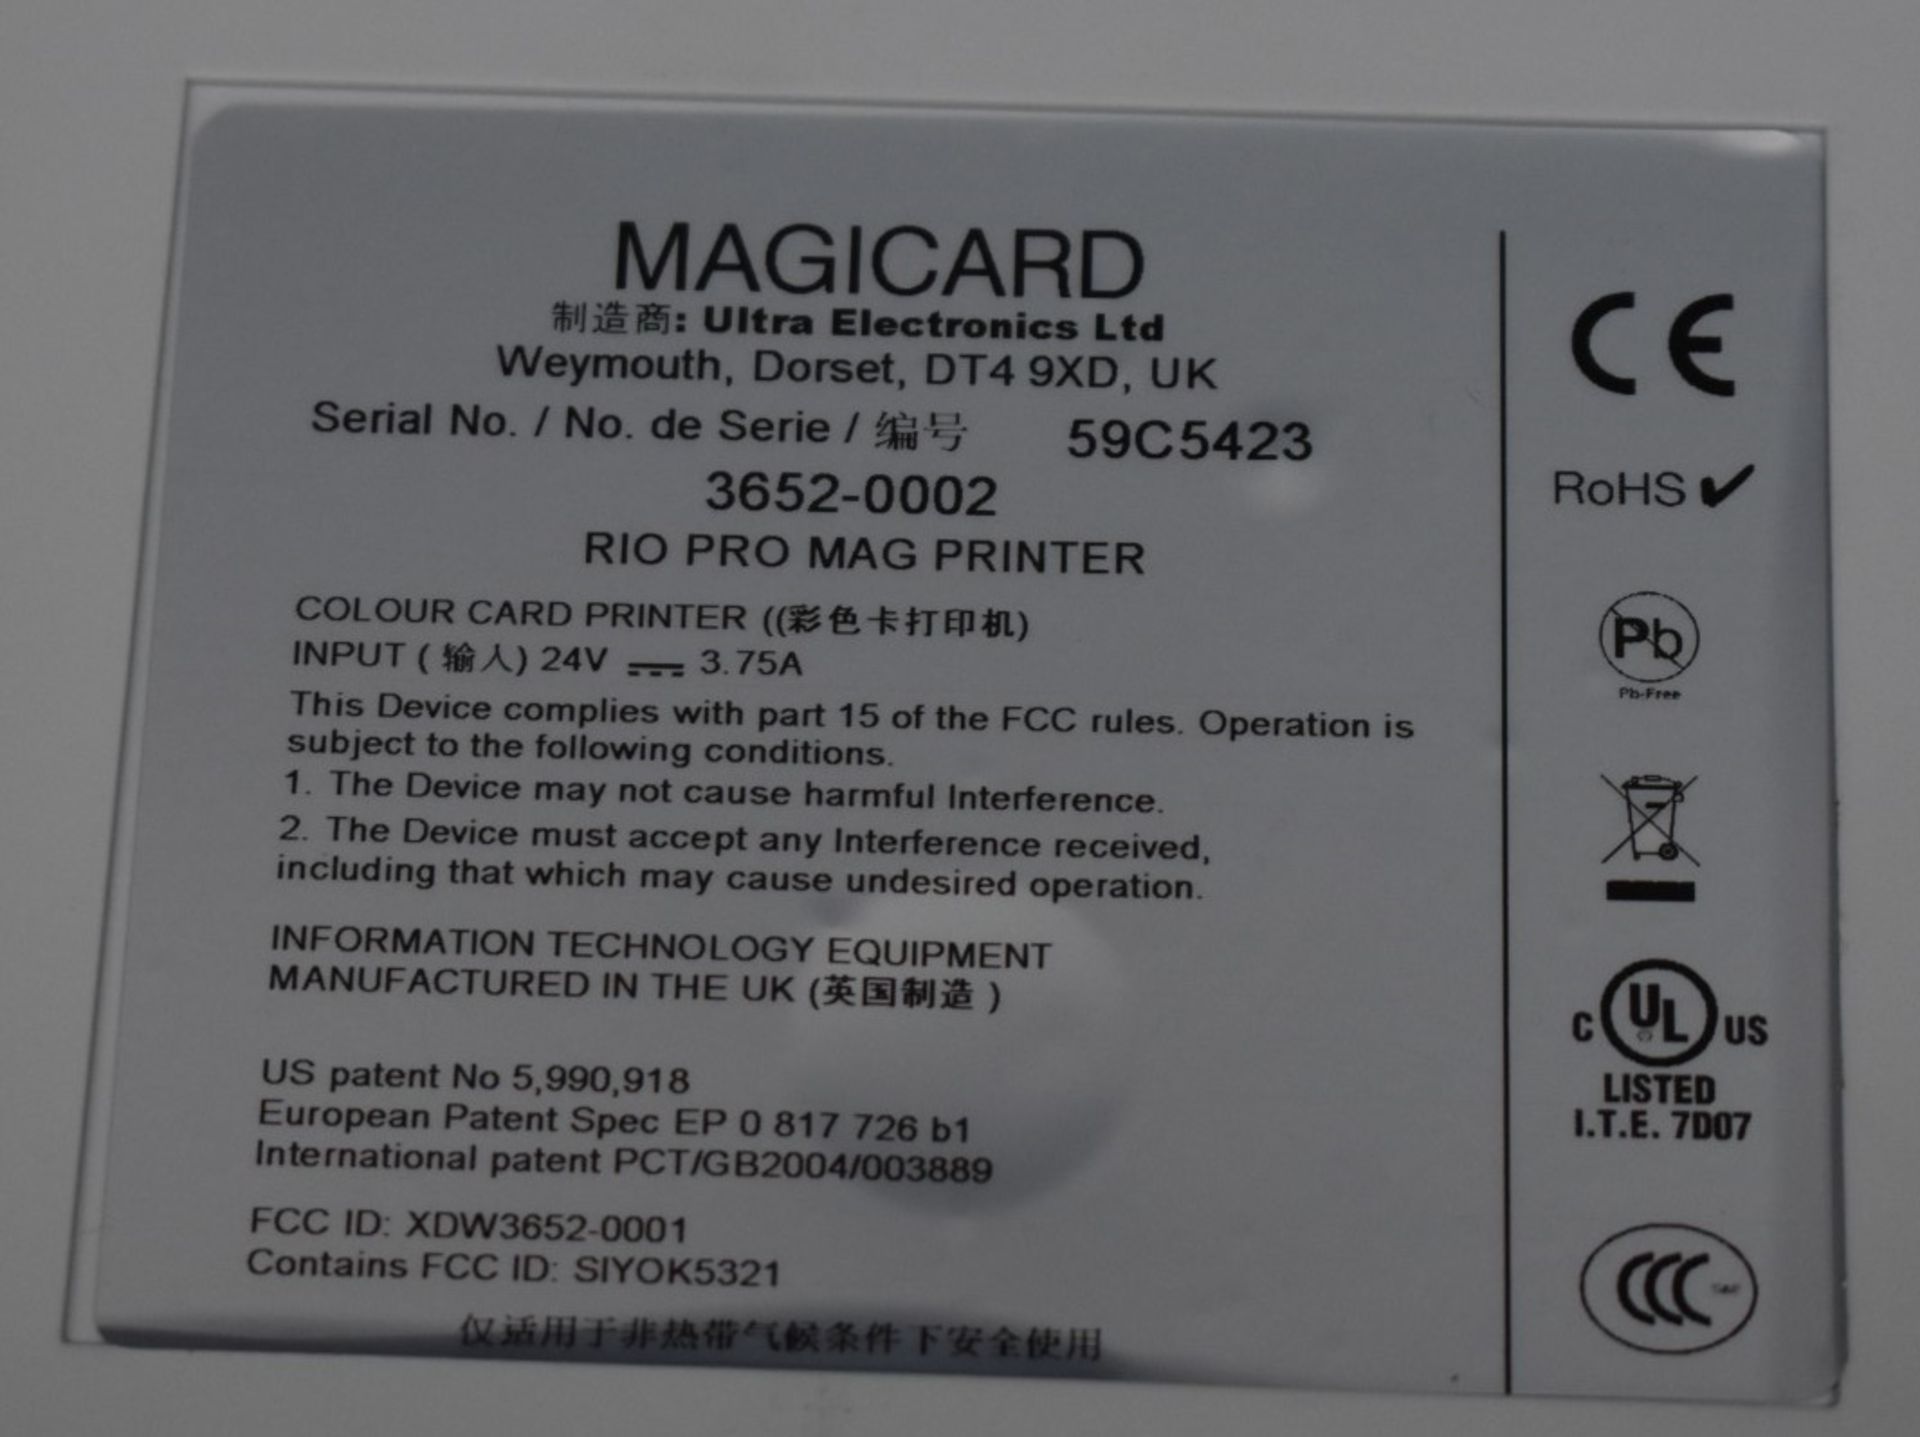 1 x Magicard Rio Pro Mag ID Printer - Model 3652-0002 - Includes Cables - Ref: In2116 Pal1 WH1 - - Image 6 of 6